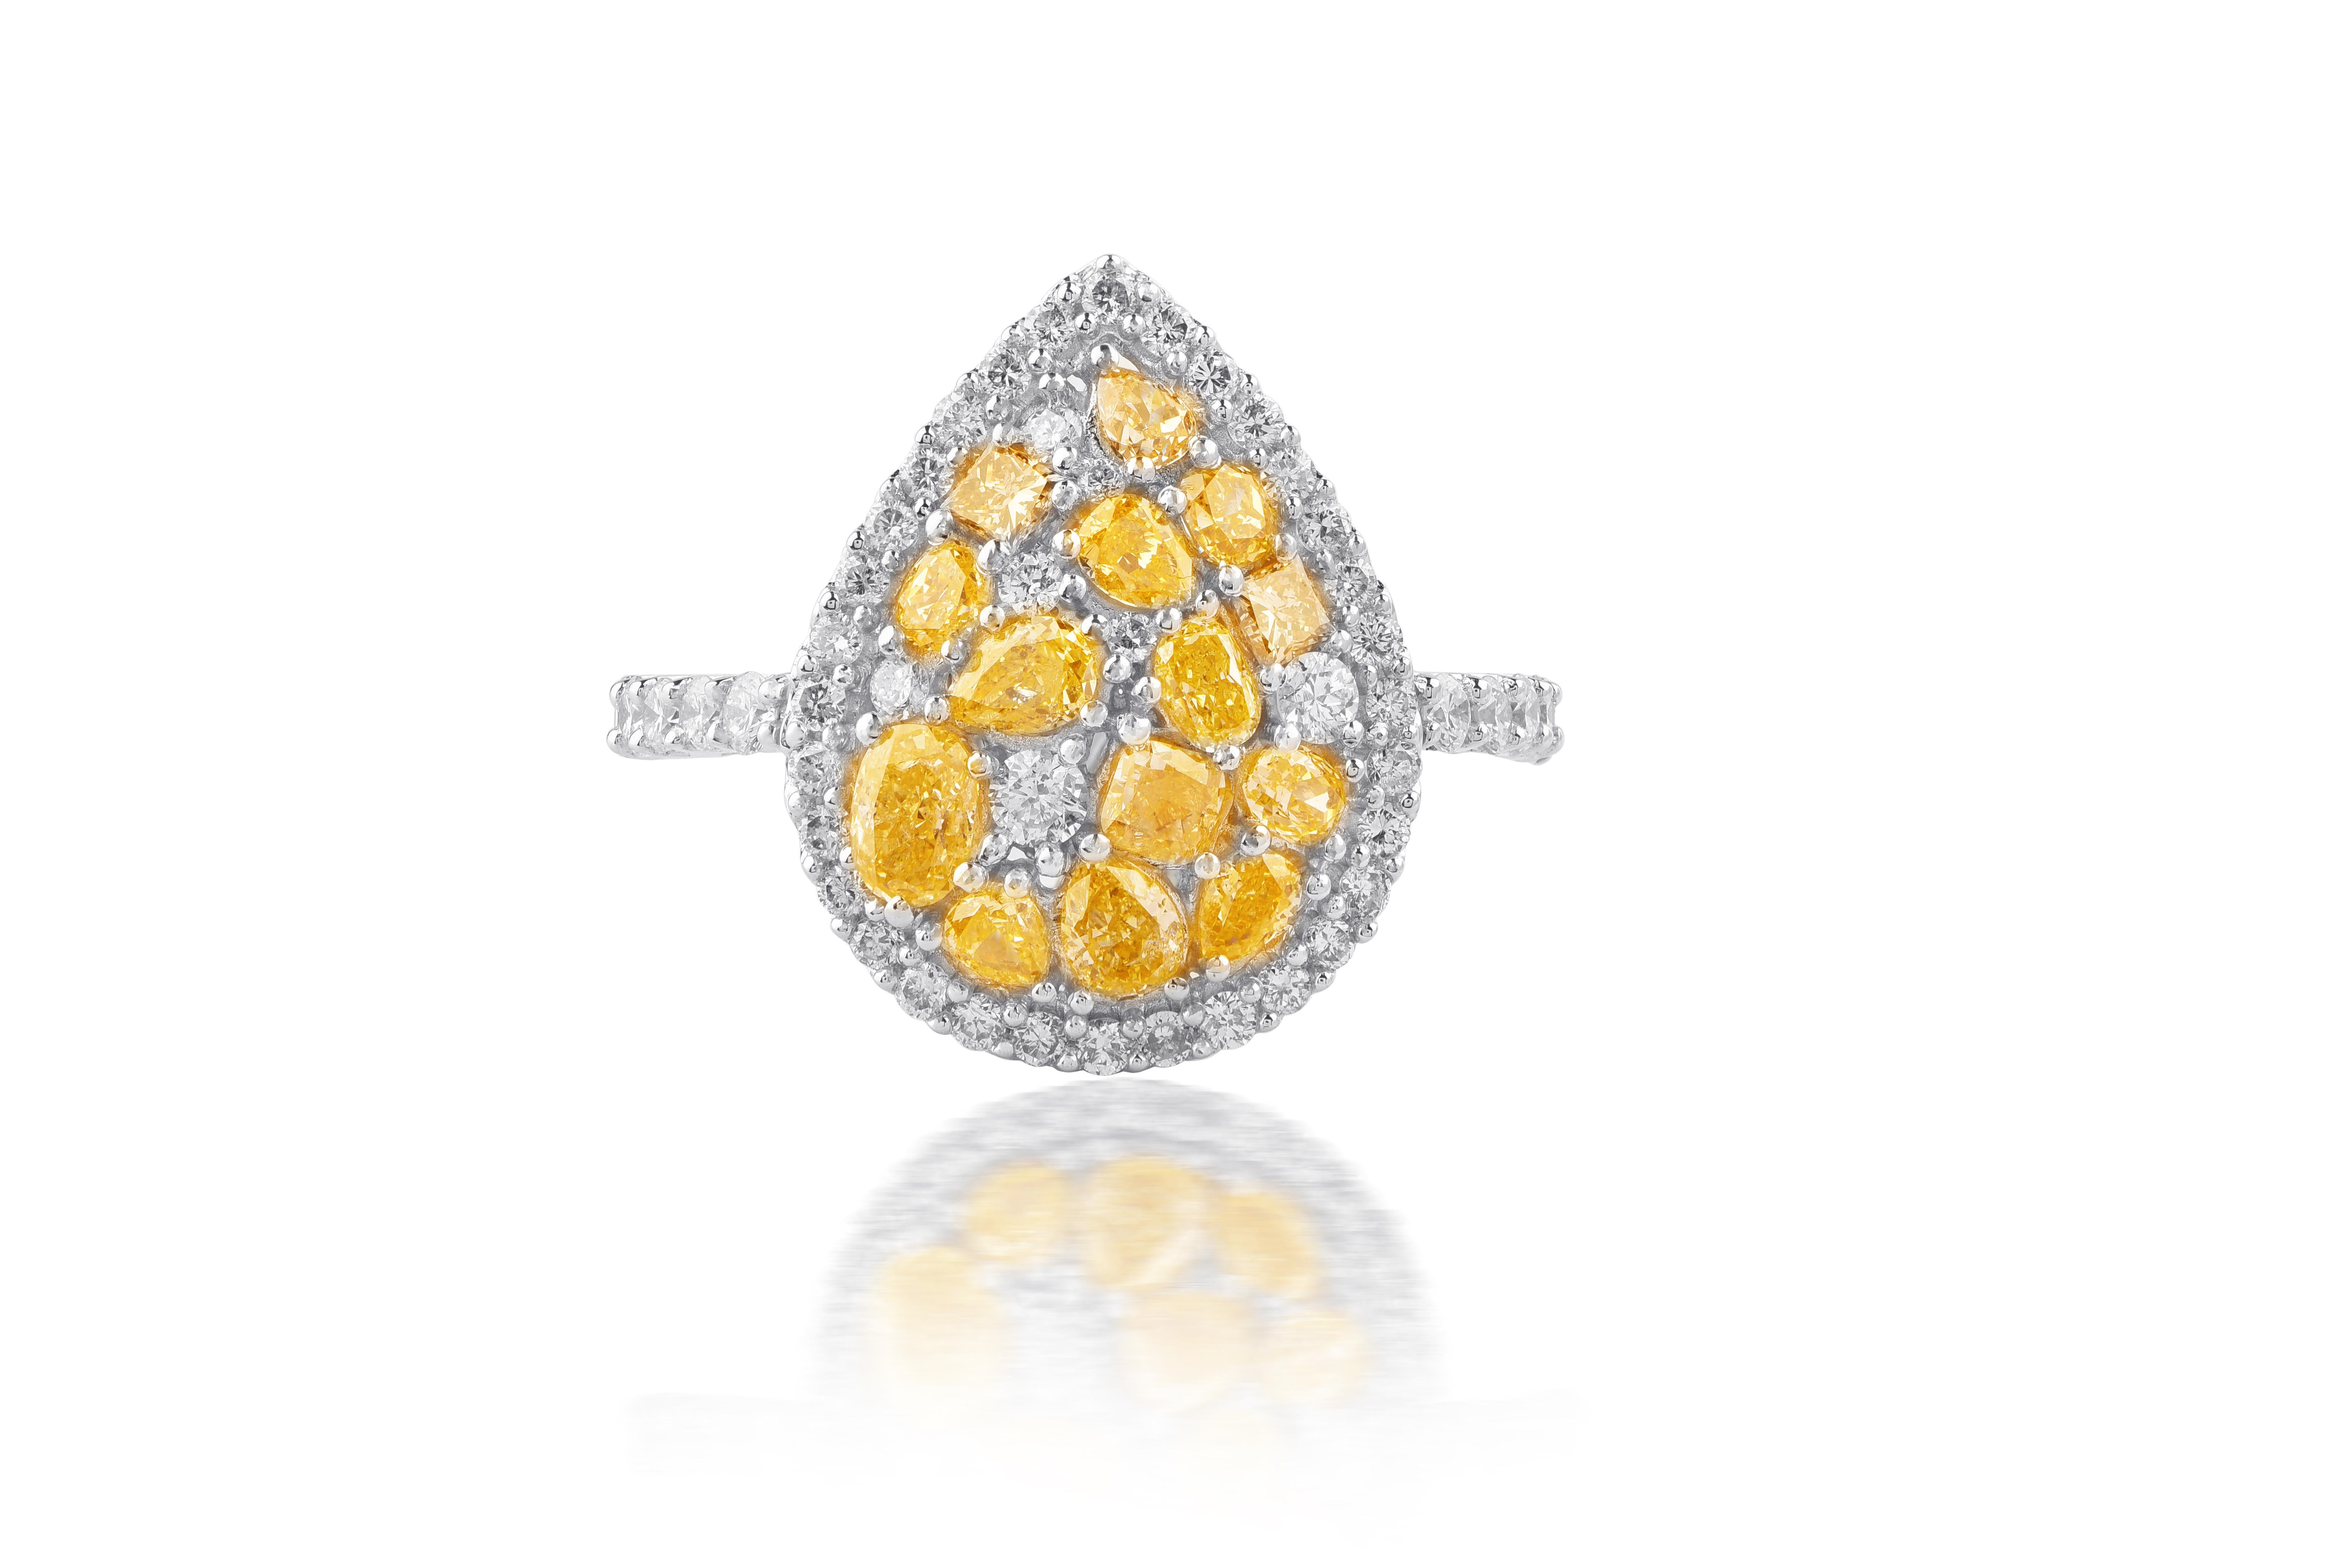 This gemstone ring makes a sparkling statement. Studded with 61 round diamonds including  Cushion, Pear and Oval Cut Lemon Diamonds and Princess Cut Brown Diamonds in prong setting and expertly crafted in 14 kt white gold. Diamonds are graded H-I